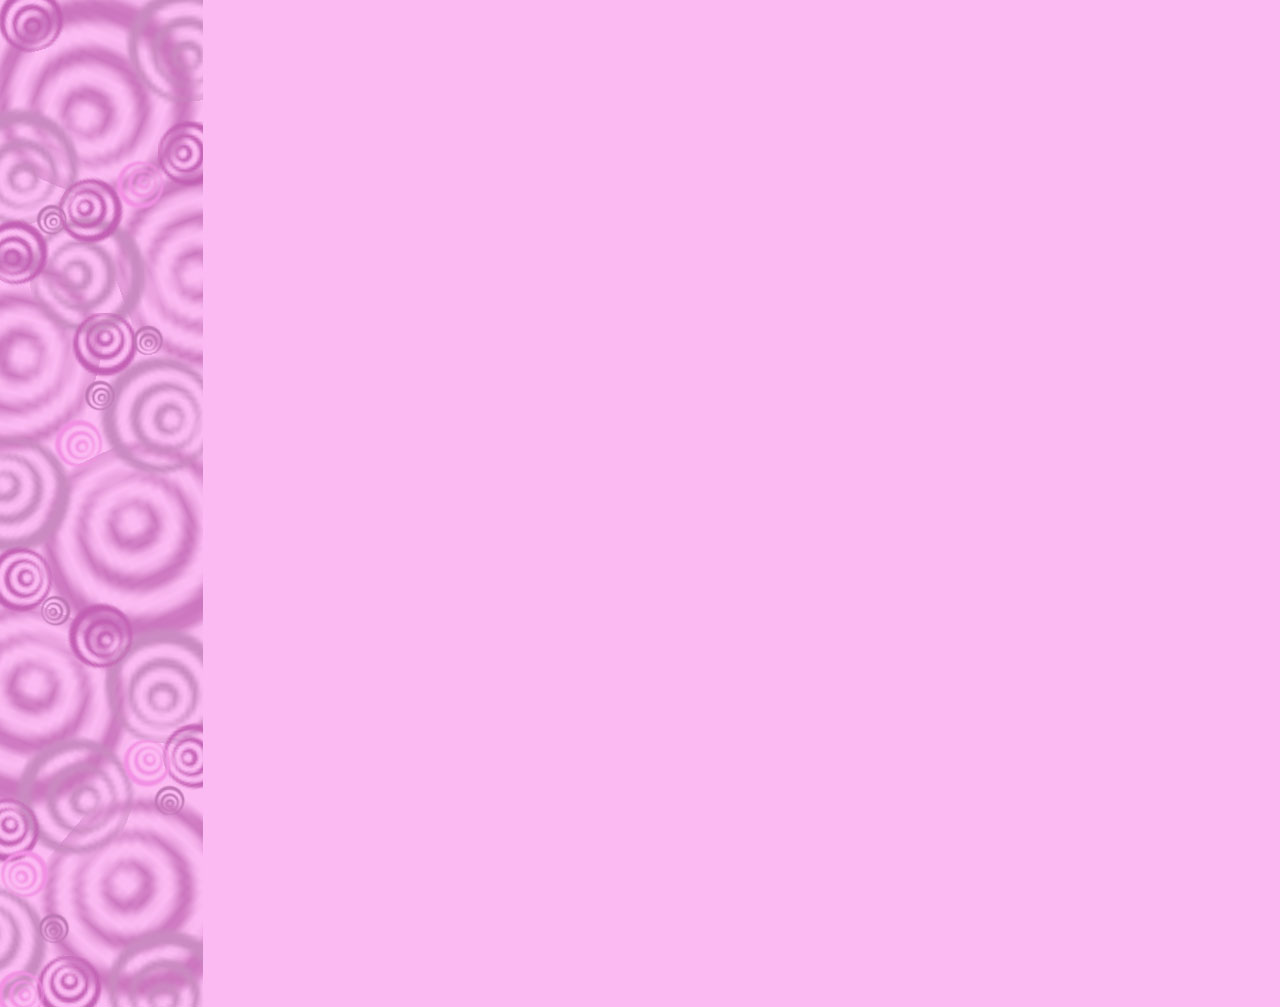 Pink and Purple Backgrounds httpbackgroundspicaboocombackgrounds